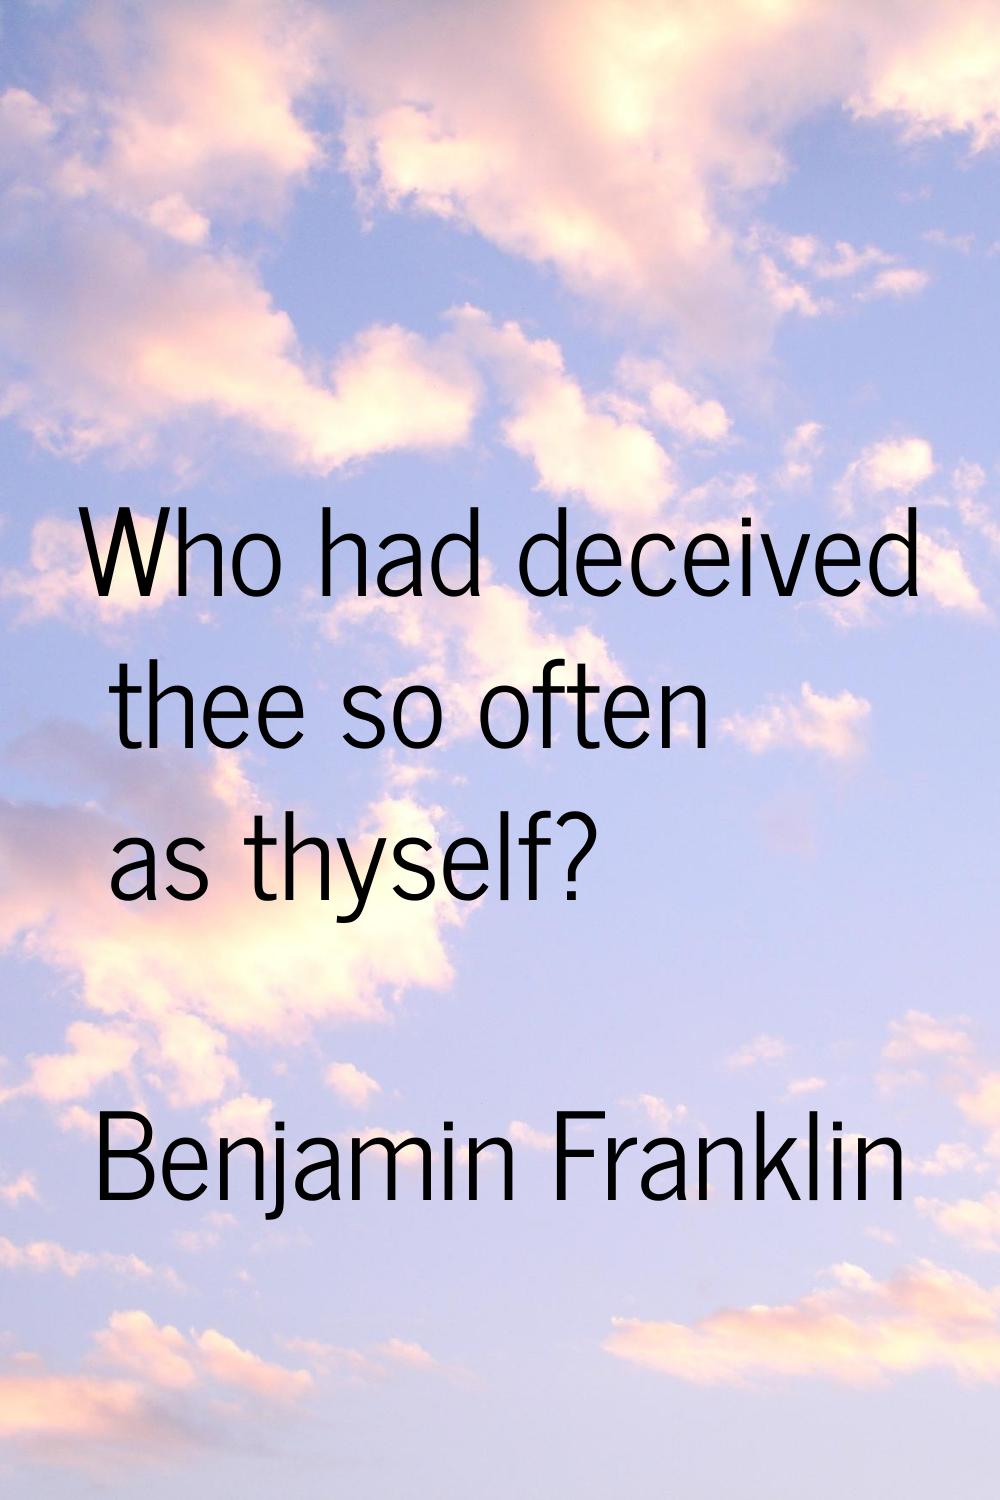 Who had deceived thee so often as thyself?